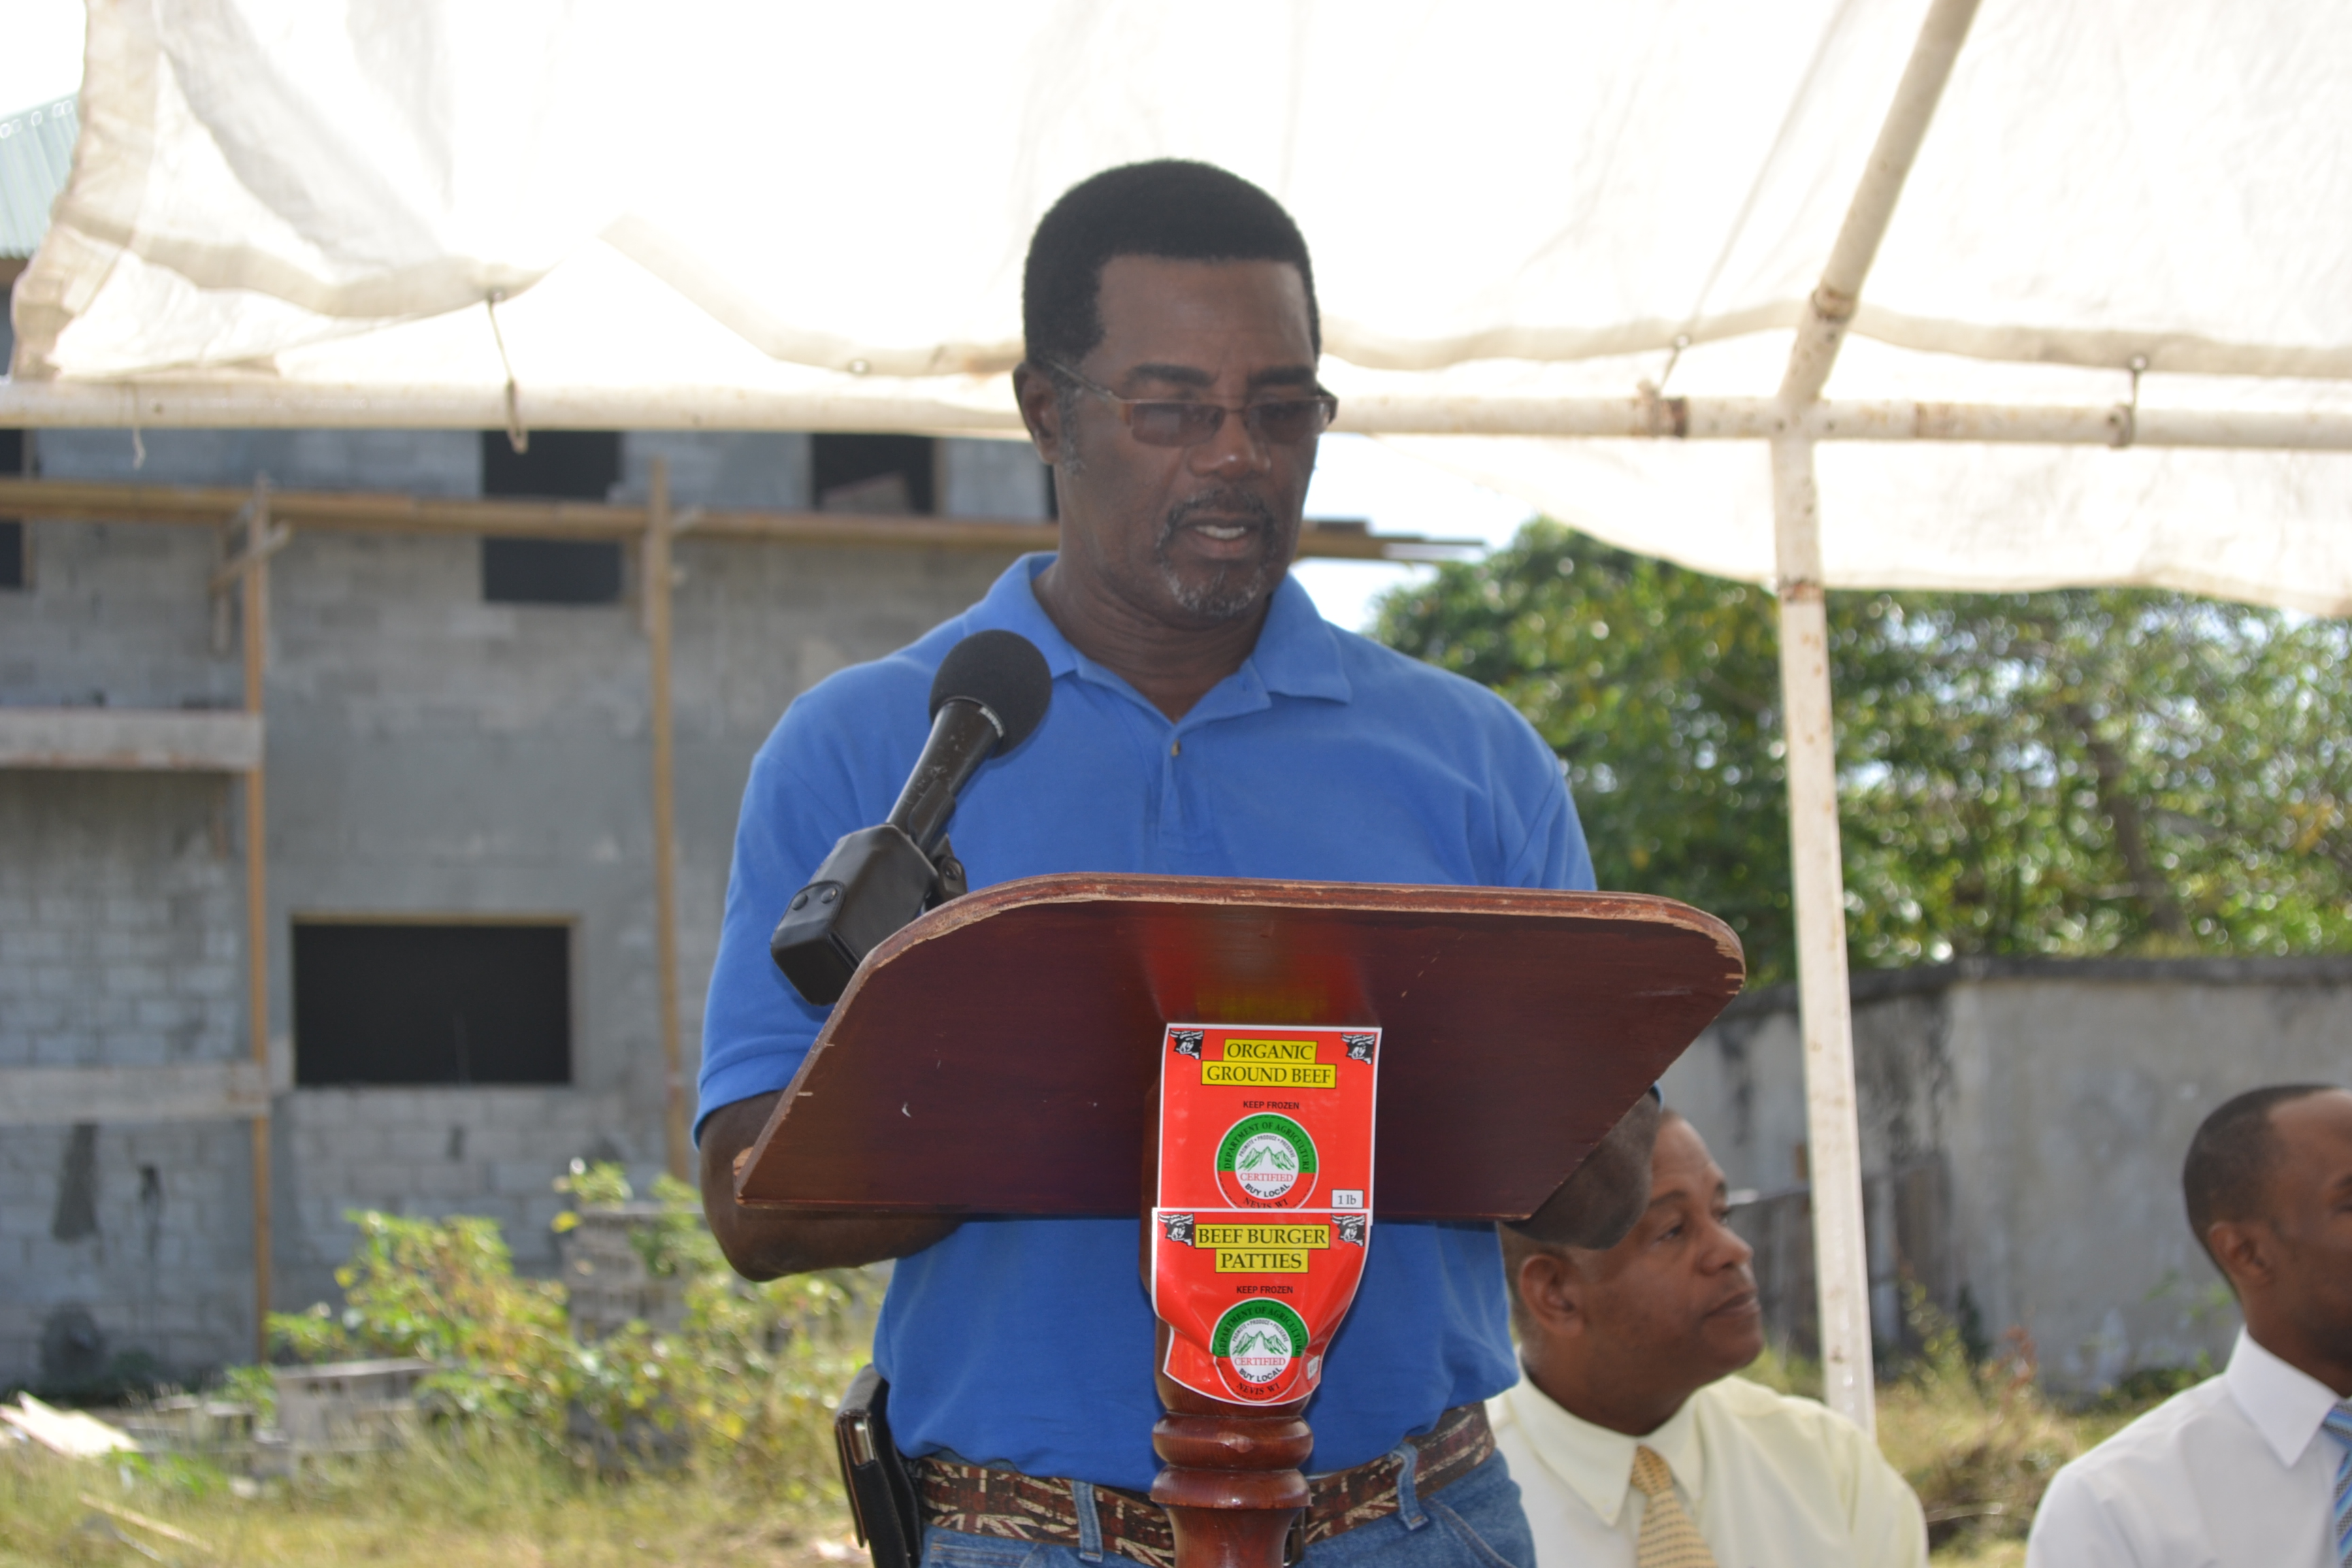 Mr. Edmund Jeffers Contractor for Nevis Housing and Land Development Corporation for Abattoir Extension giving an overview of the project at the Ground Breaking Ceremony for the extension of the Abattoir Division on the Abattoir Division Grounds on January 26 2016